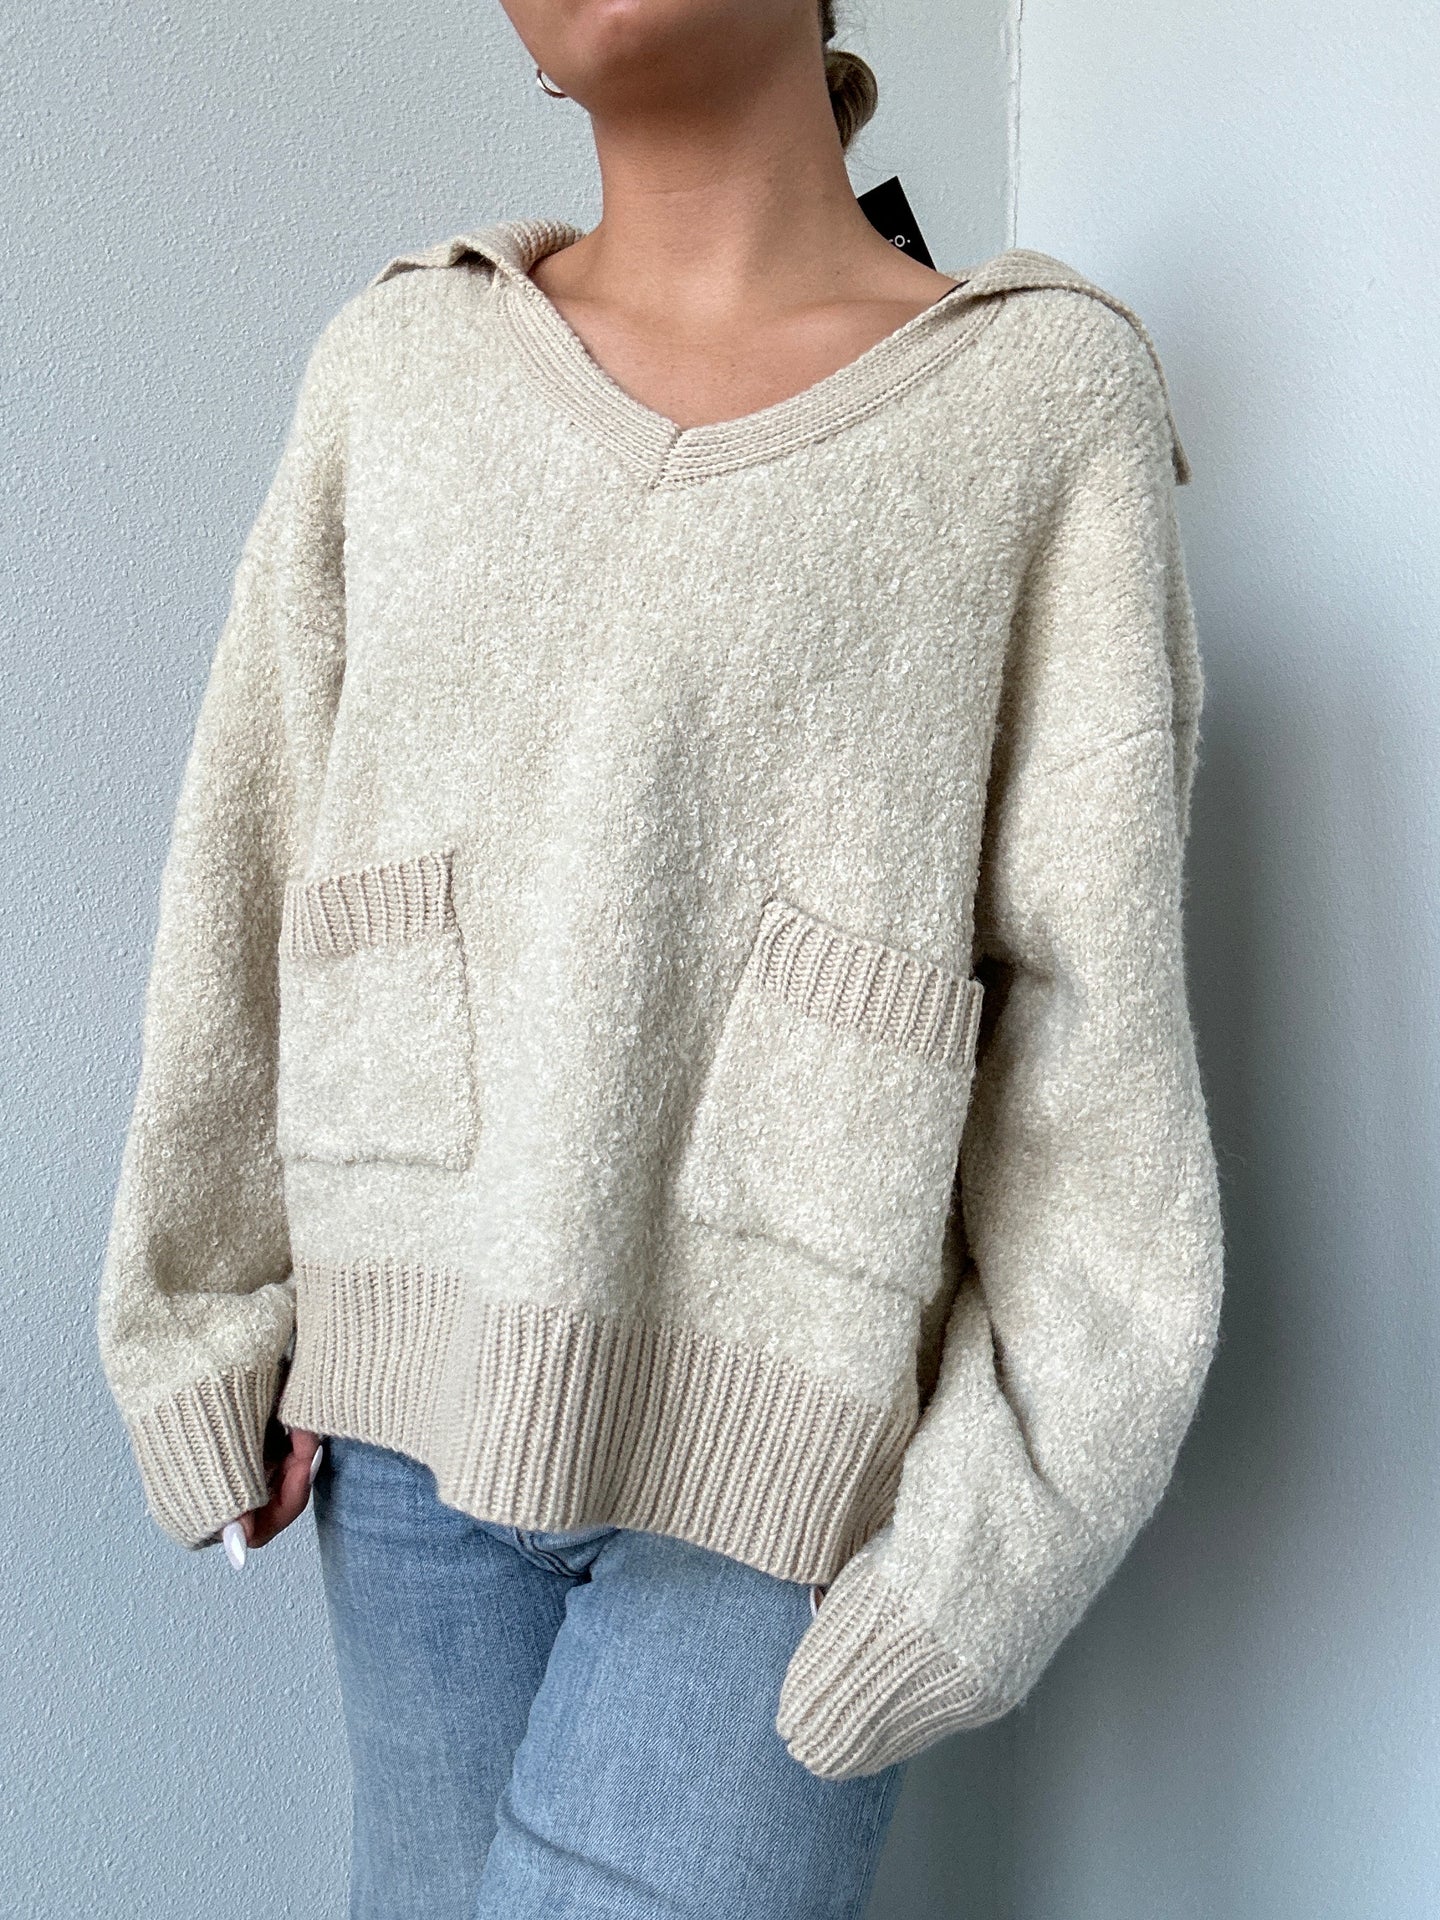 Oversized Knit Collared Sweater